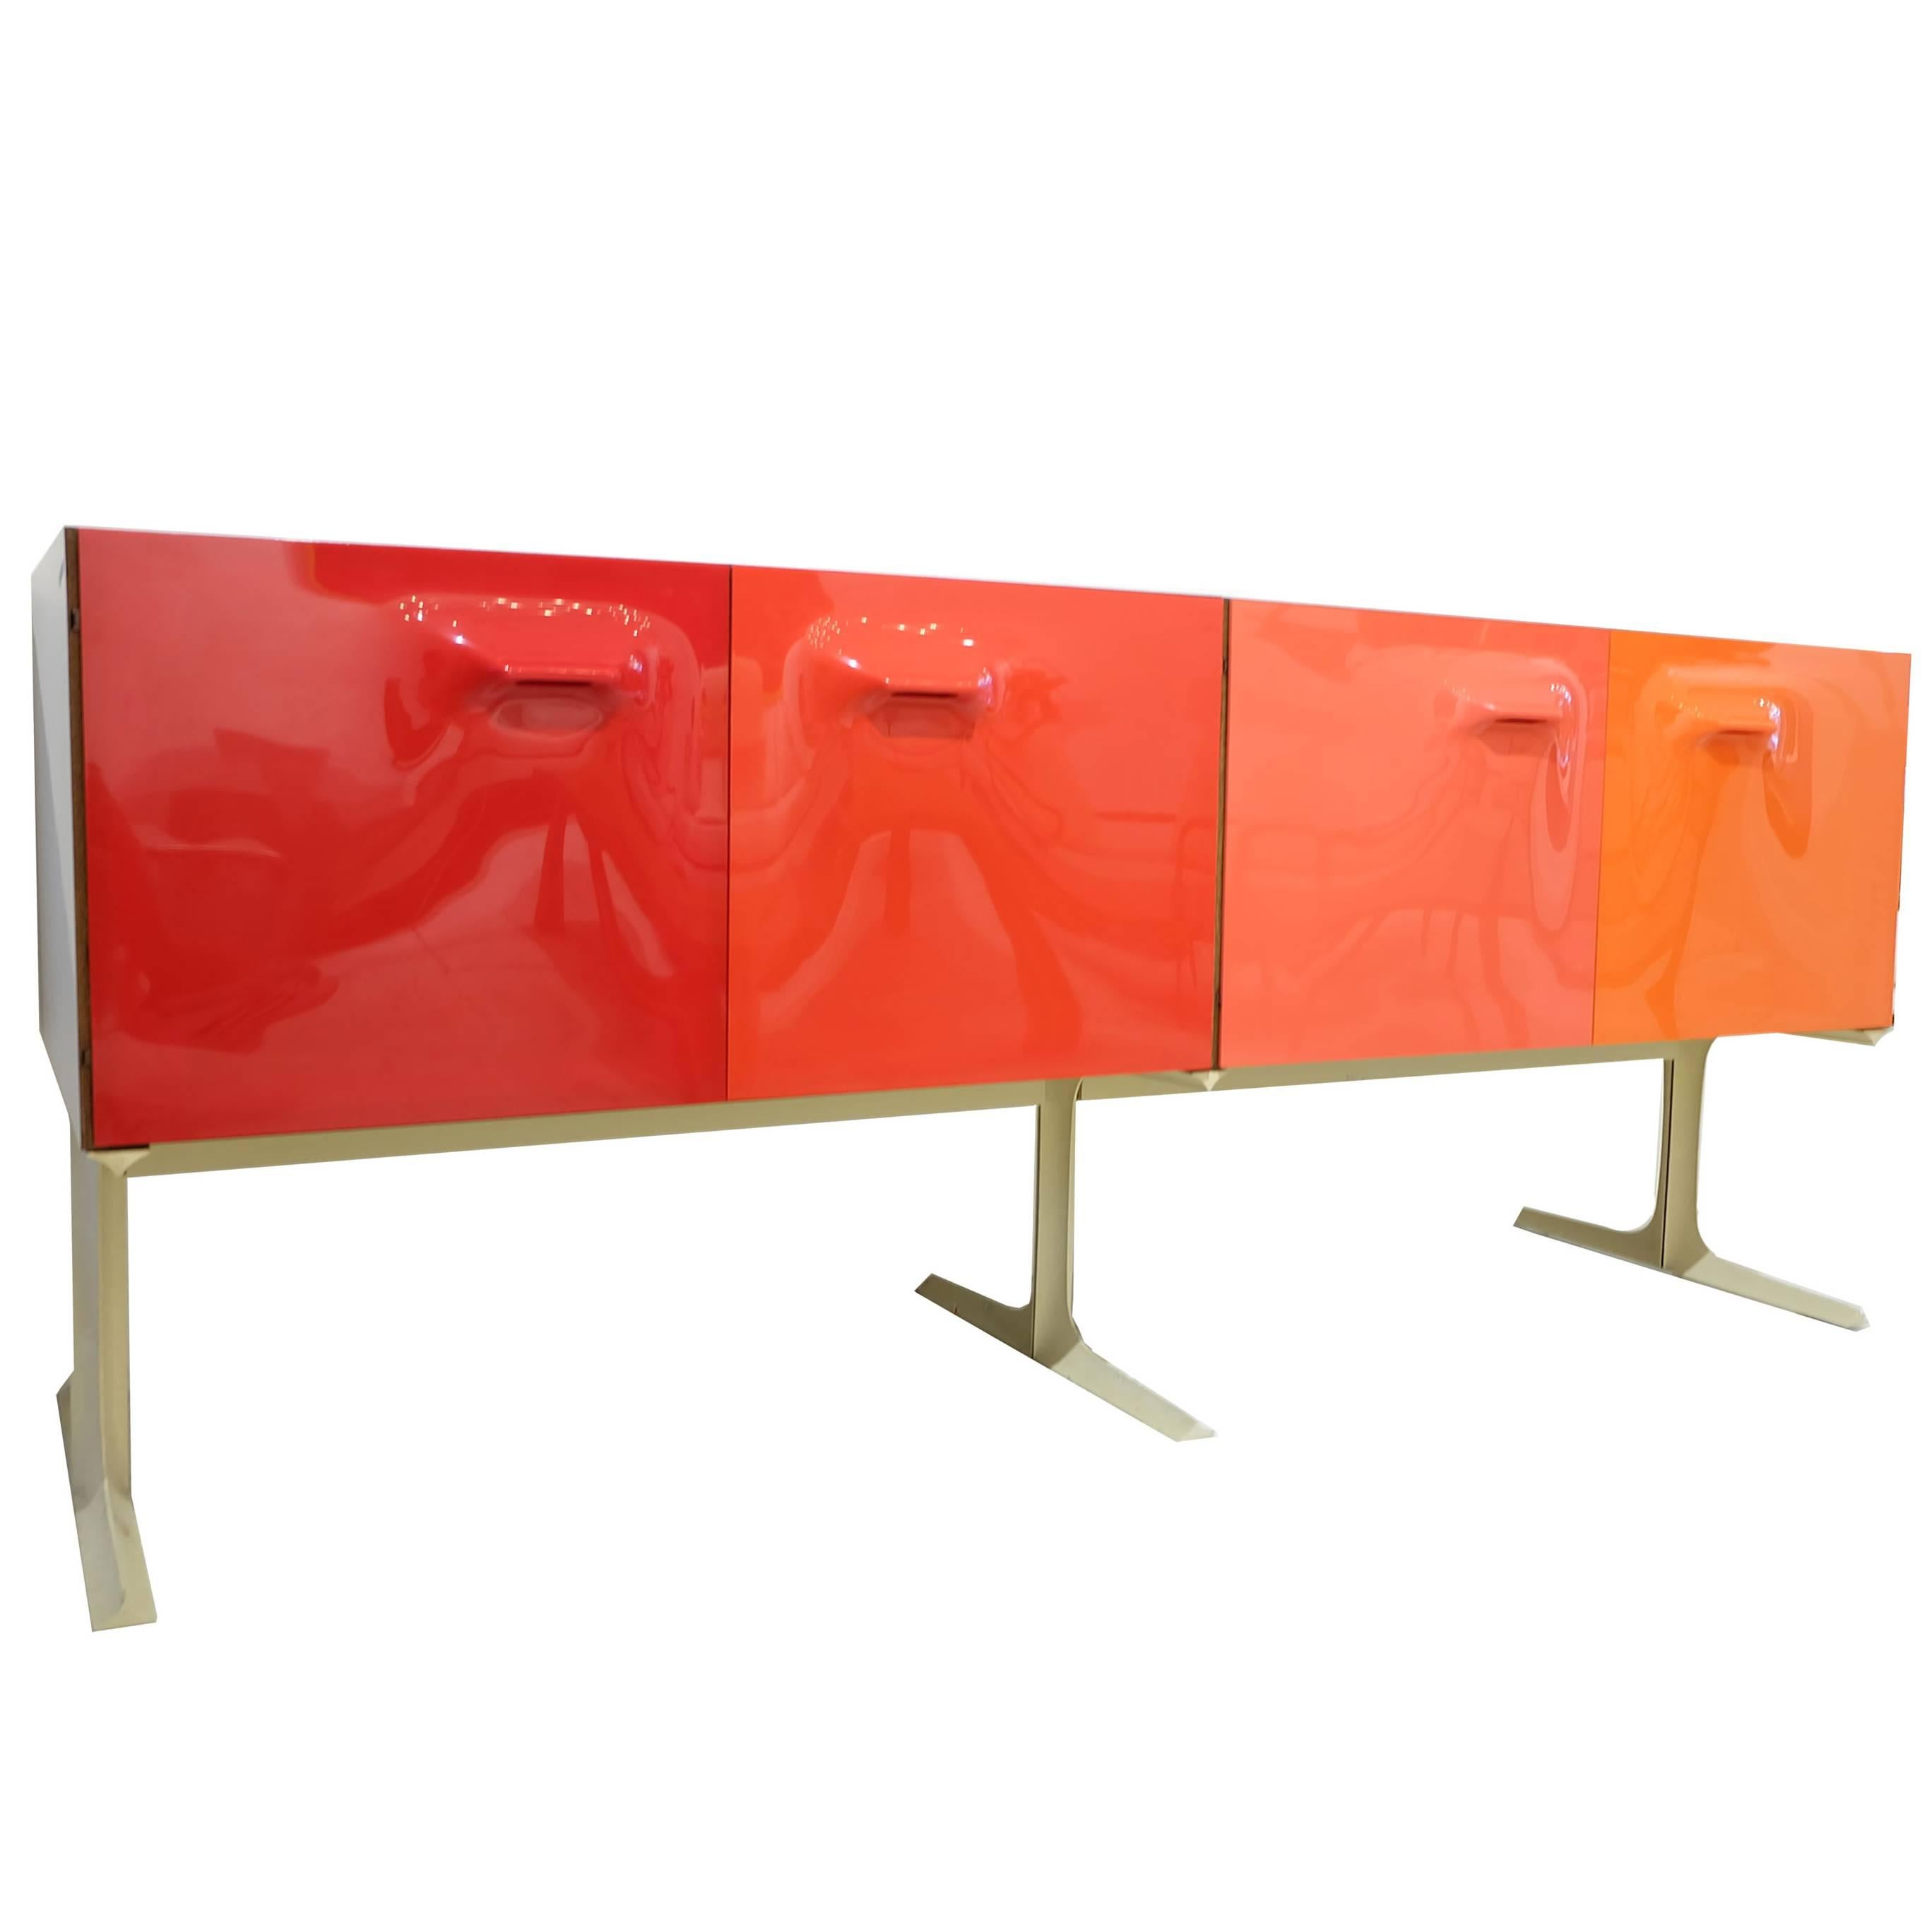 Rare Raymond Loewy for Doubinsky Freres DF-2000 series bar cabinet.
Molded plastic door and drawer fronts organized in the designer's signature graduated bands of color.
Orange and yellow internal drawers; two removable bottle caddies.